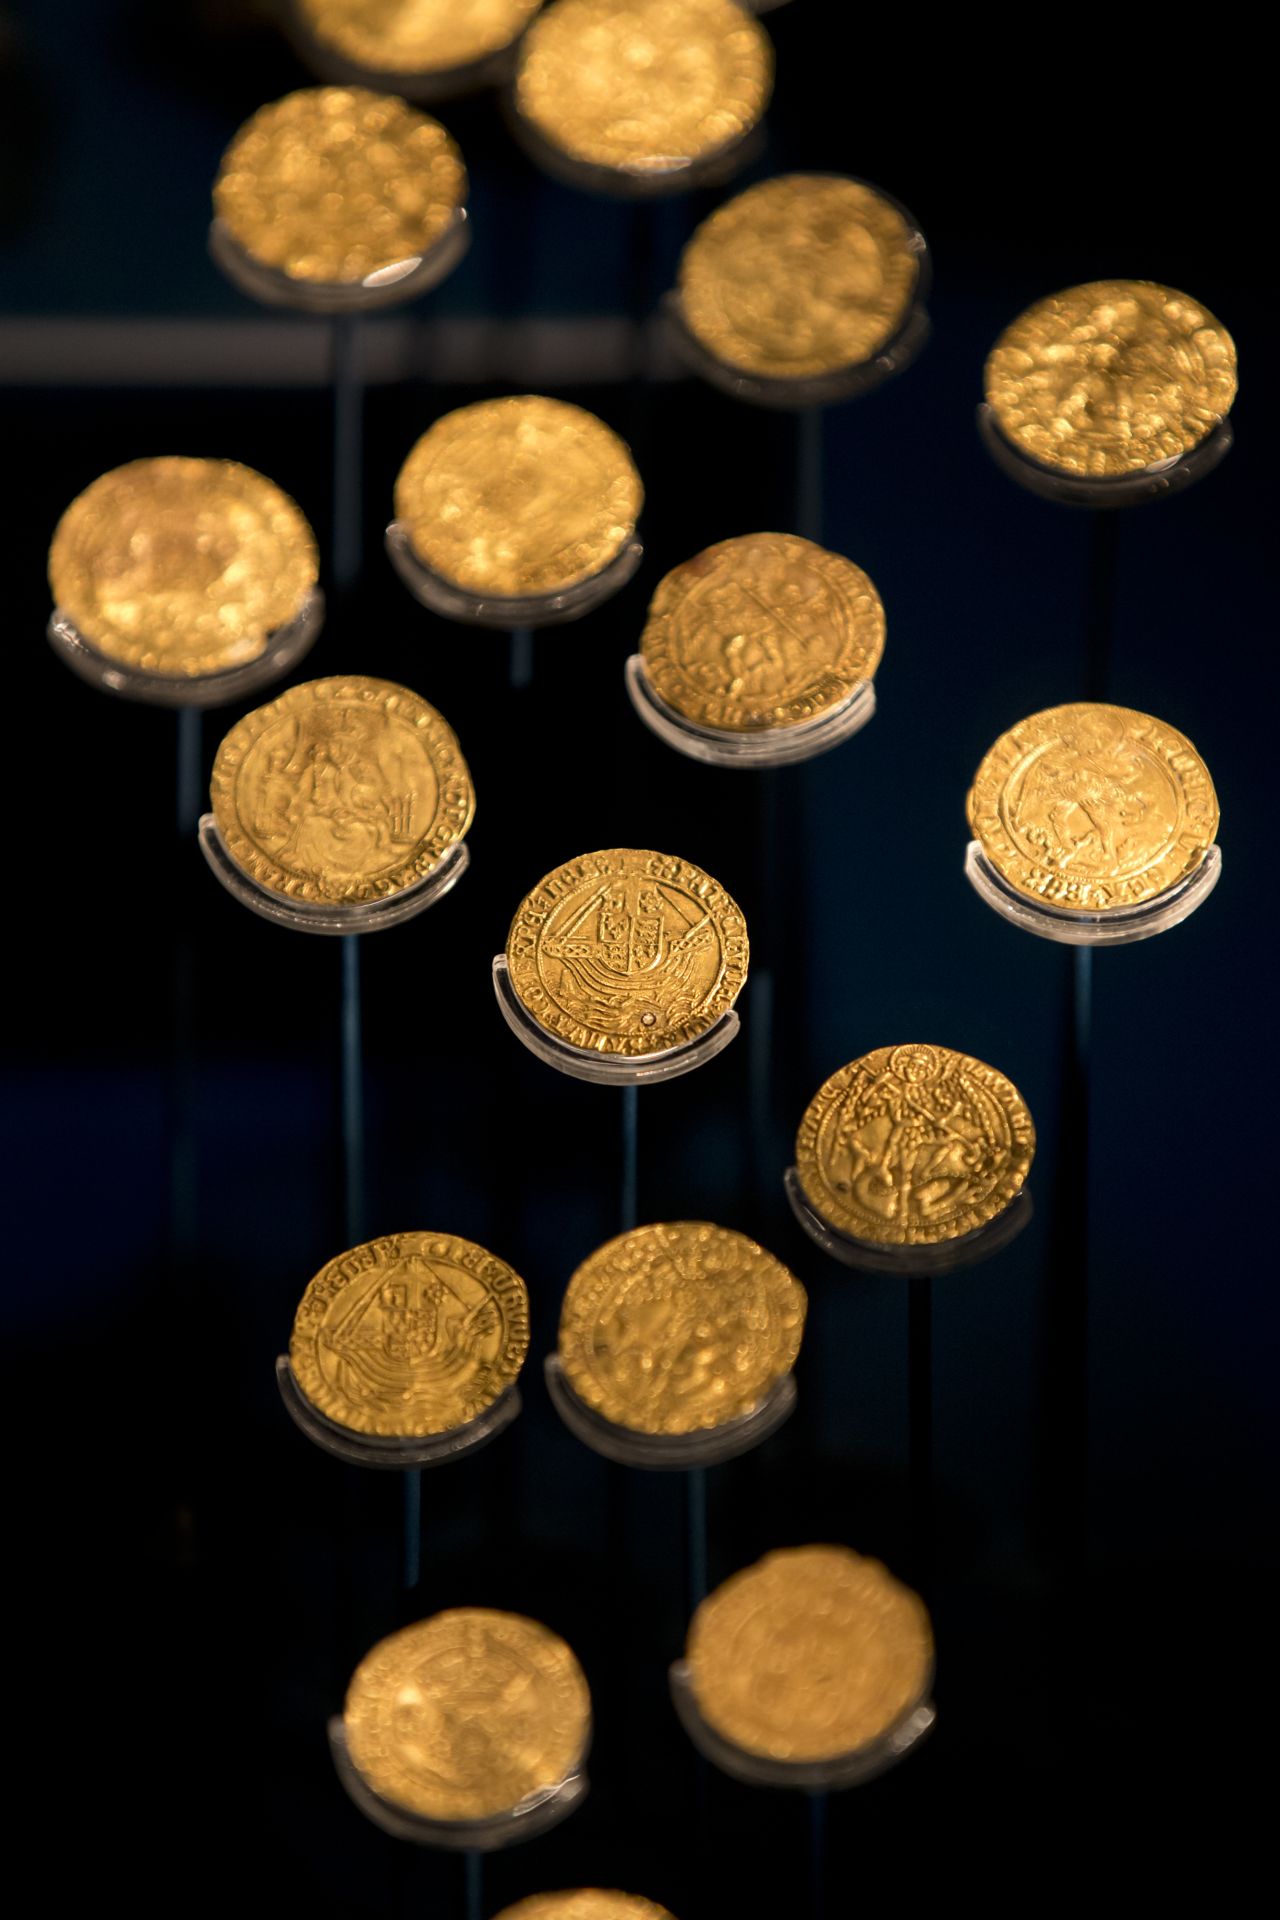 Gold coins recovered from the wreck of the Mary Rose are also on display in the new museum.